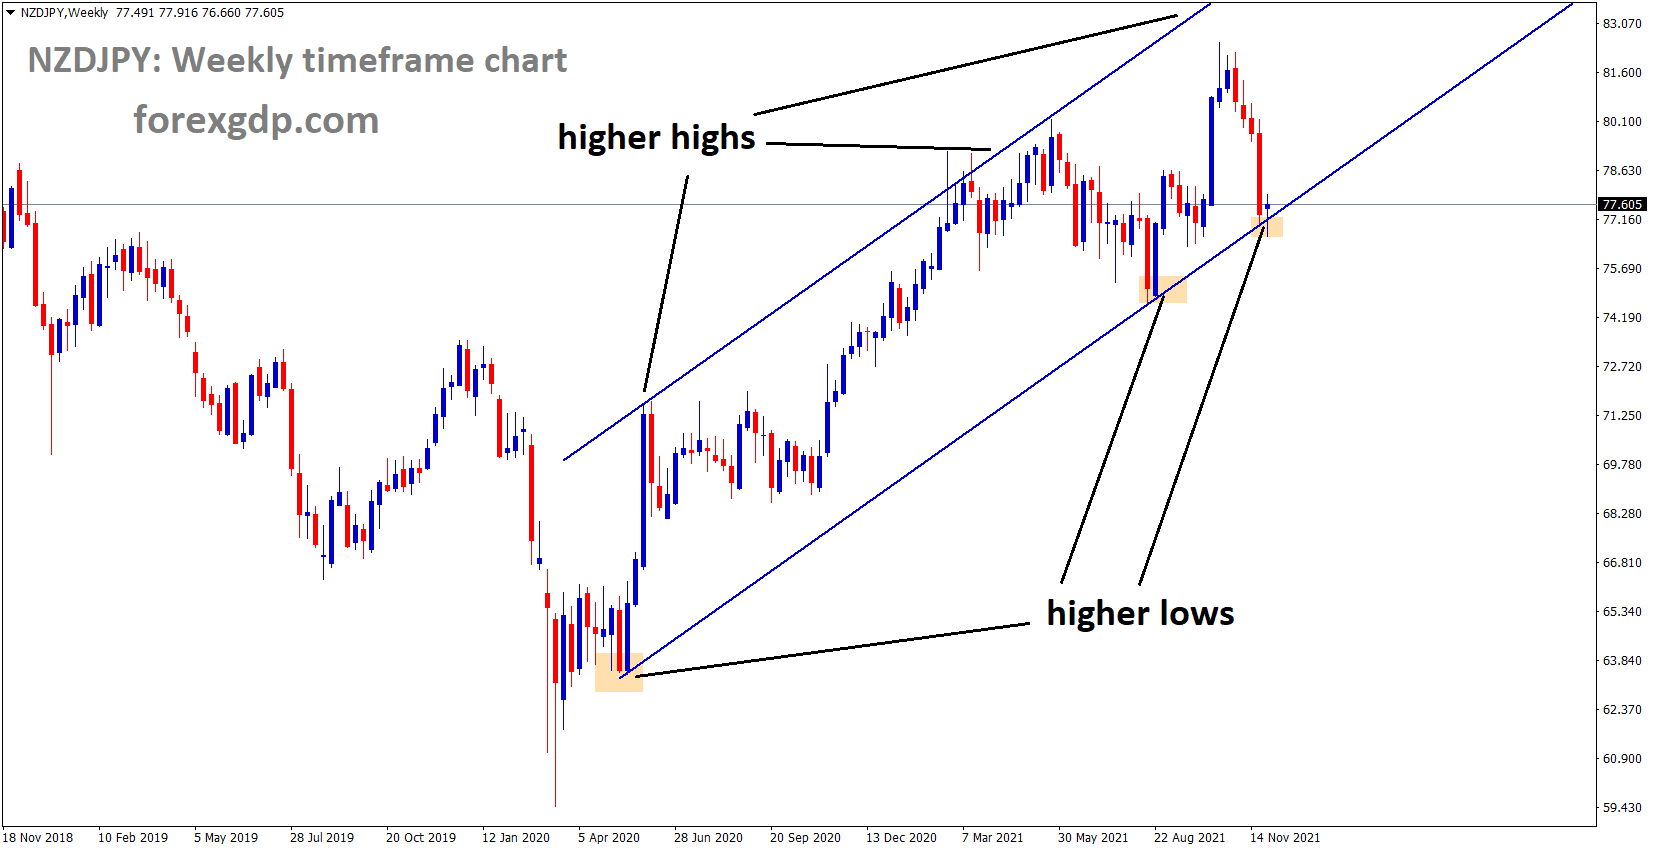 NZDJPY is moving in an Ascending channel and the market is rebounding from the higher low area of the channel